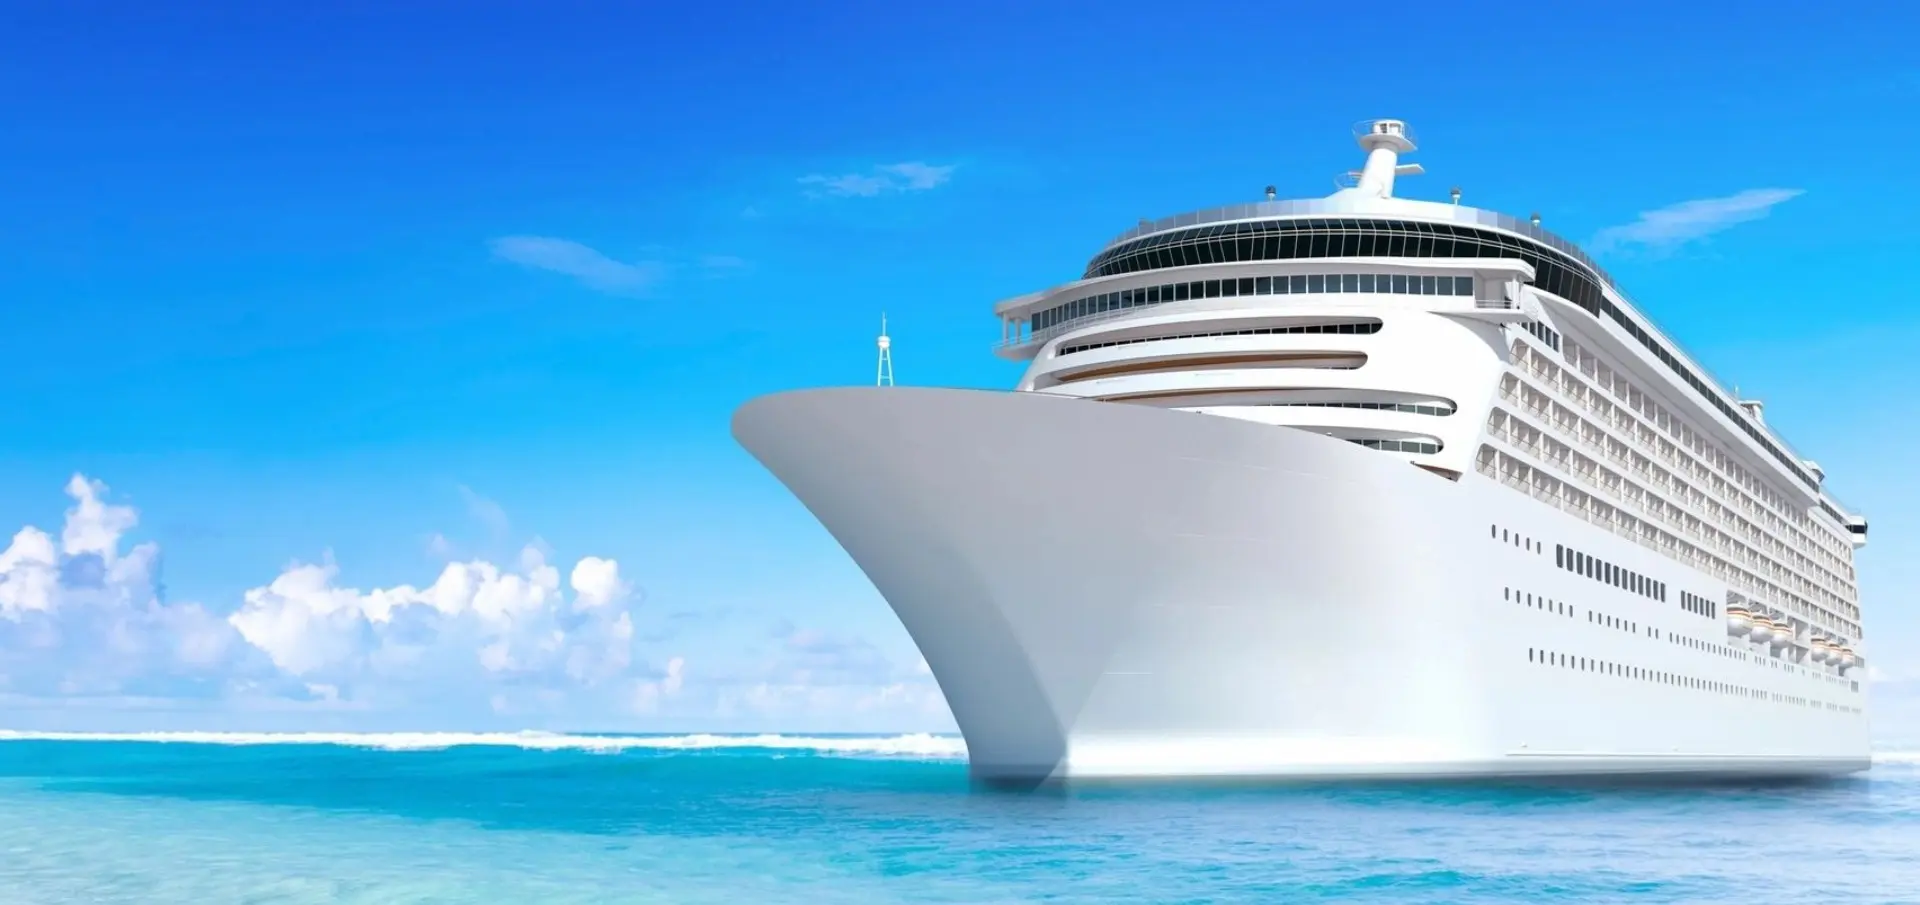 A large cruise ship in the ocean with blue skies.